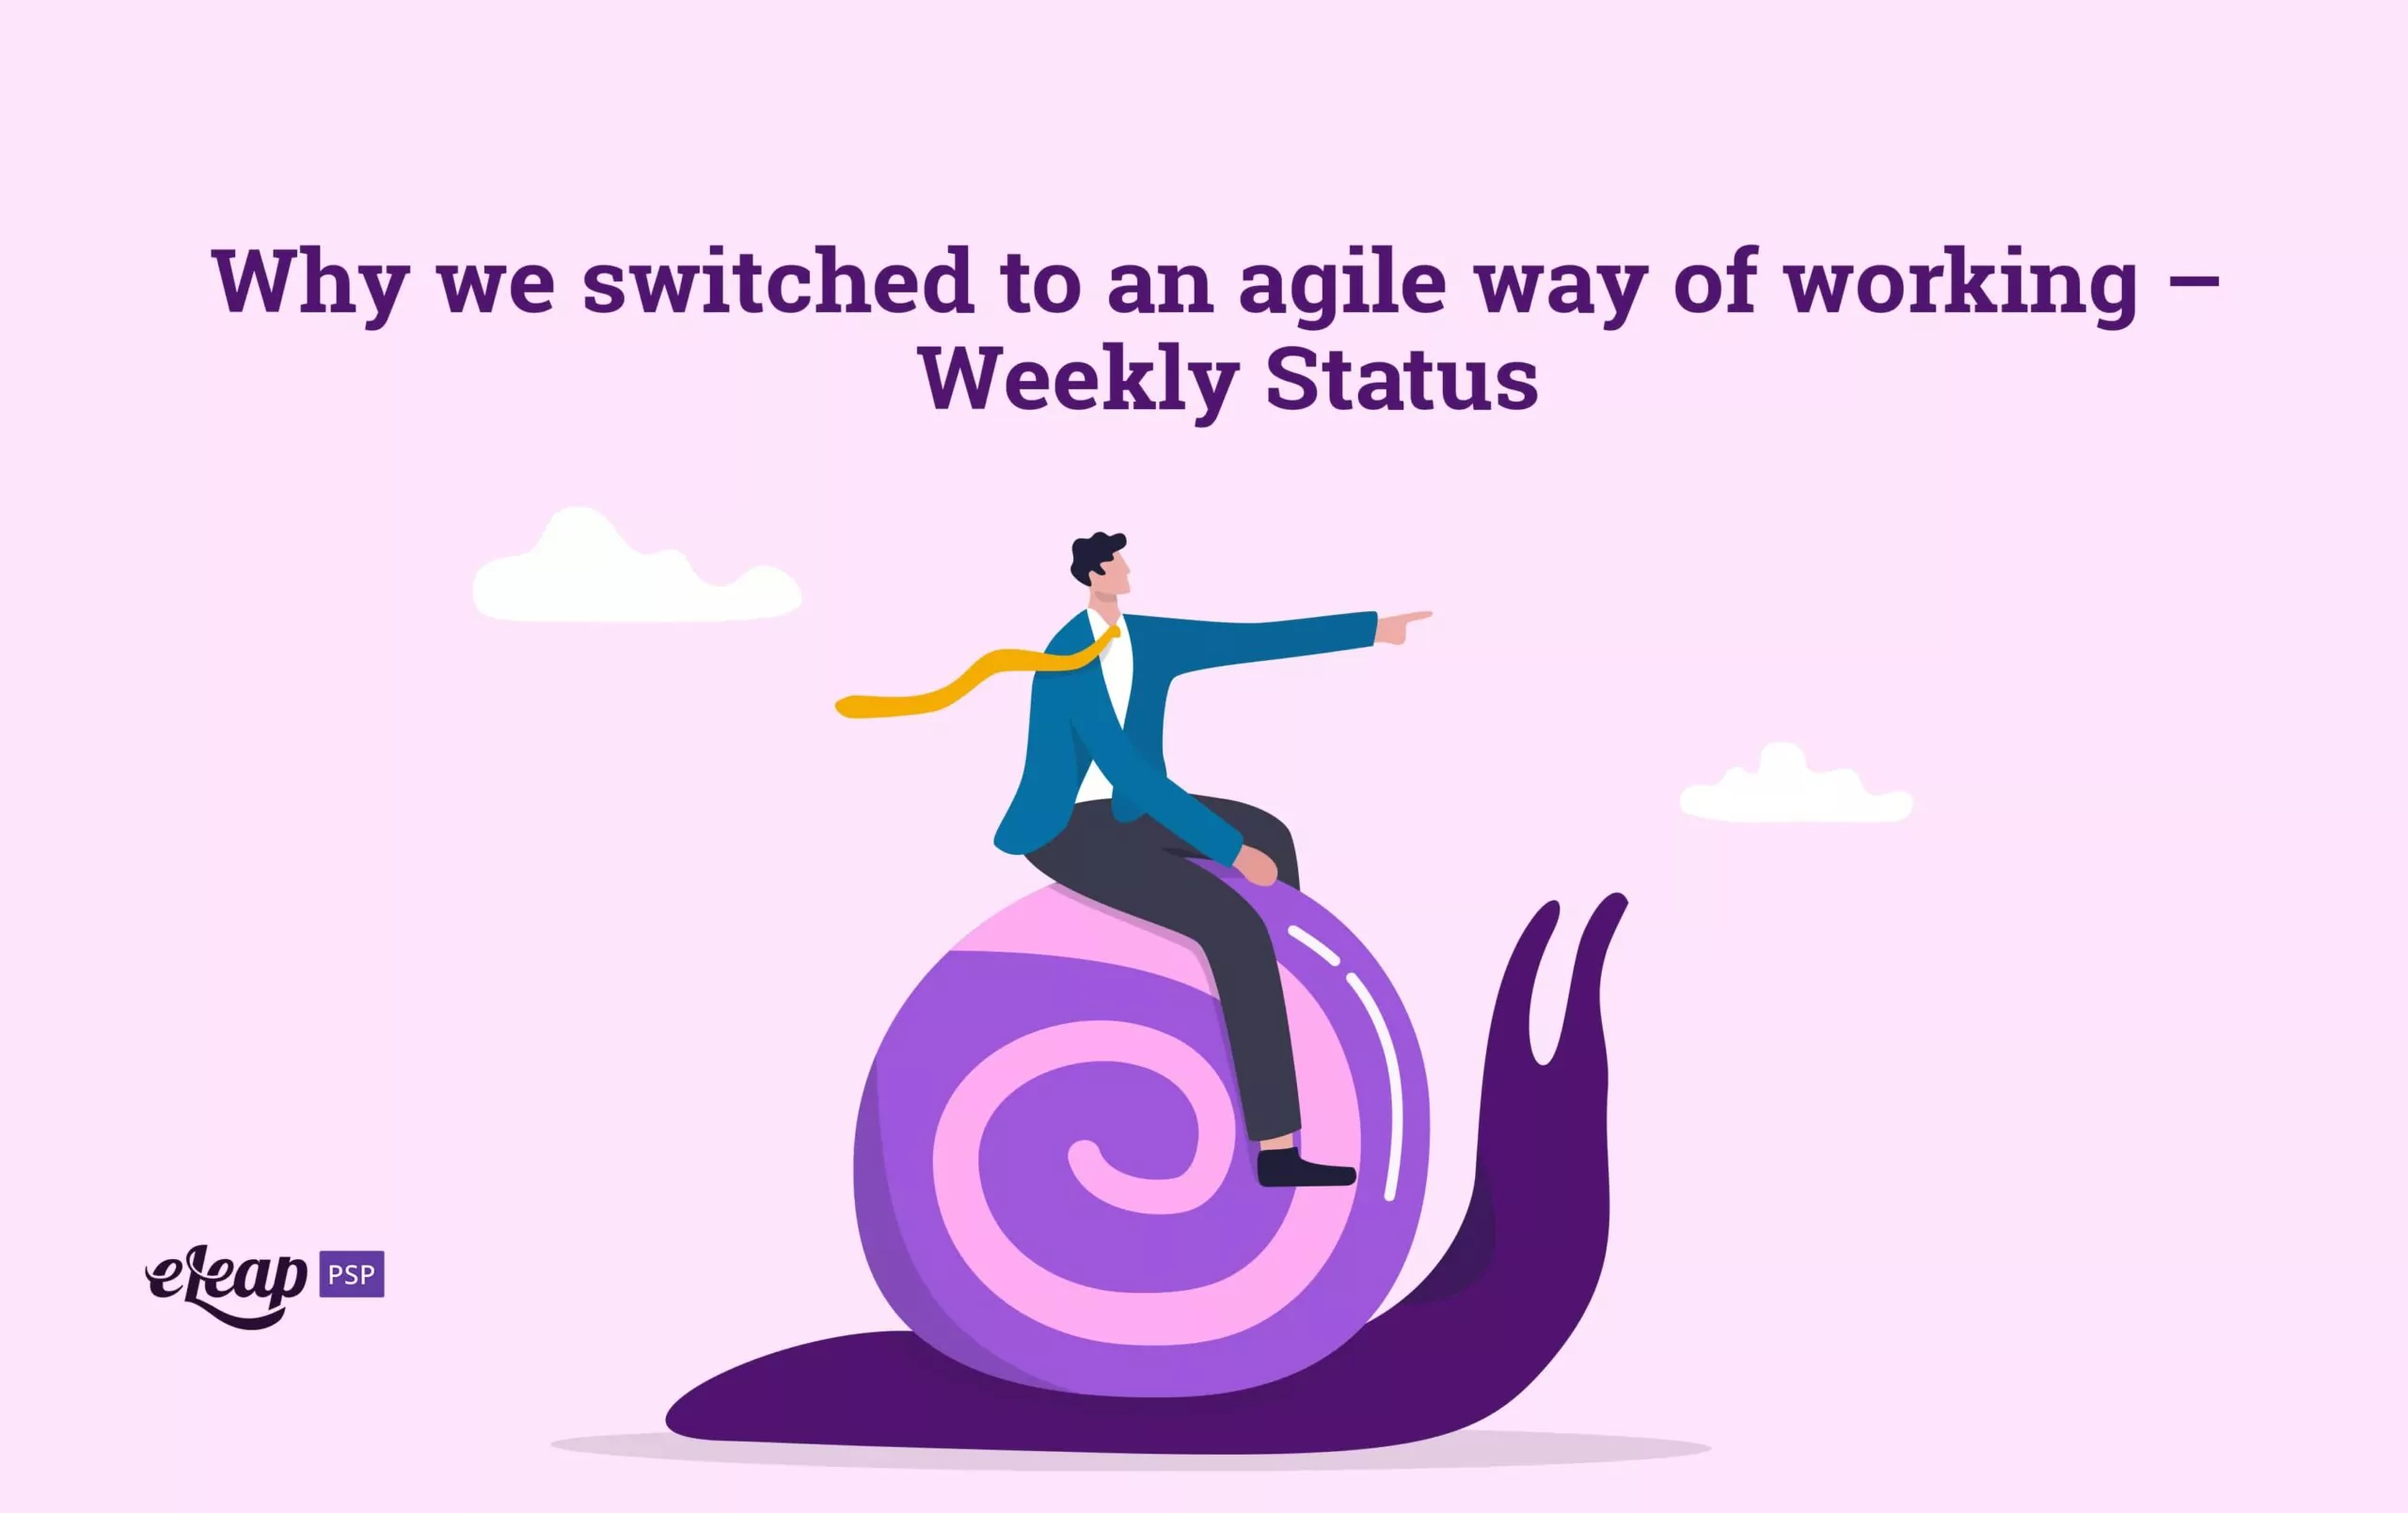 Why we switched to an agile way of working - Weekly Status